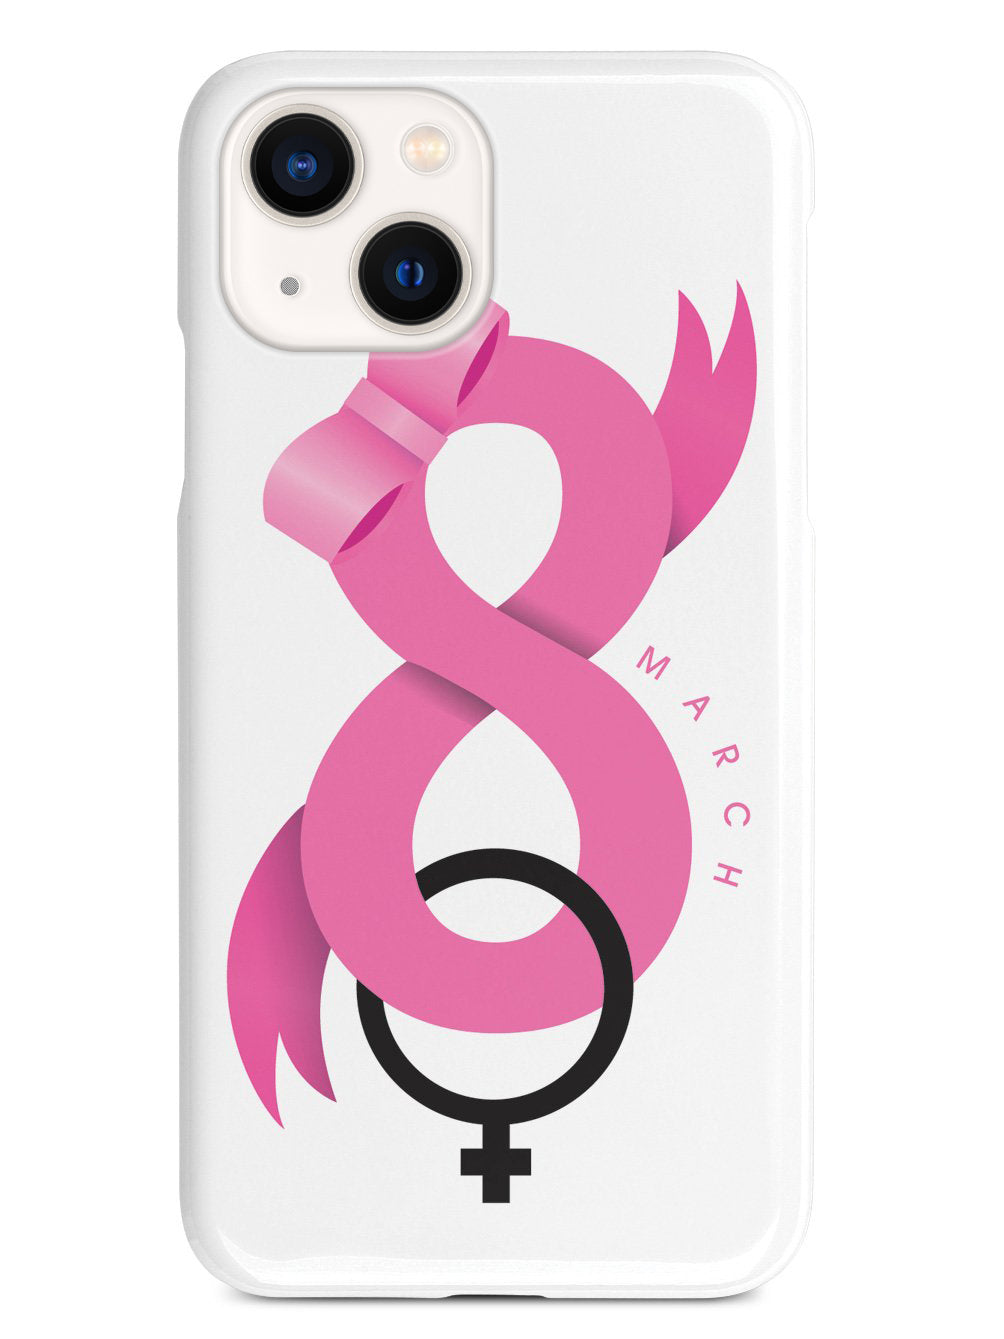 Women's Day - March 8 - Pink Ribbon Case